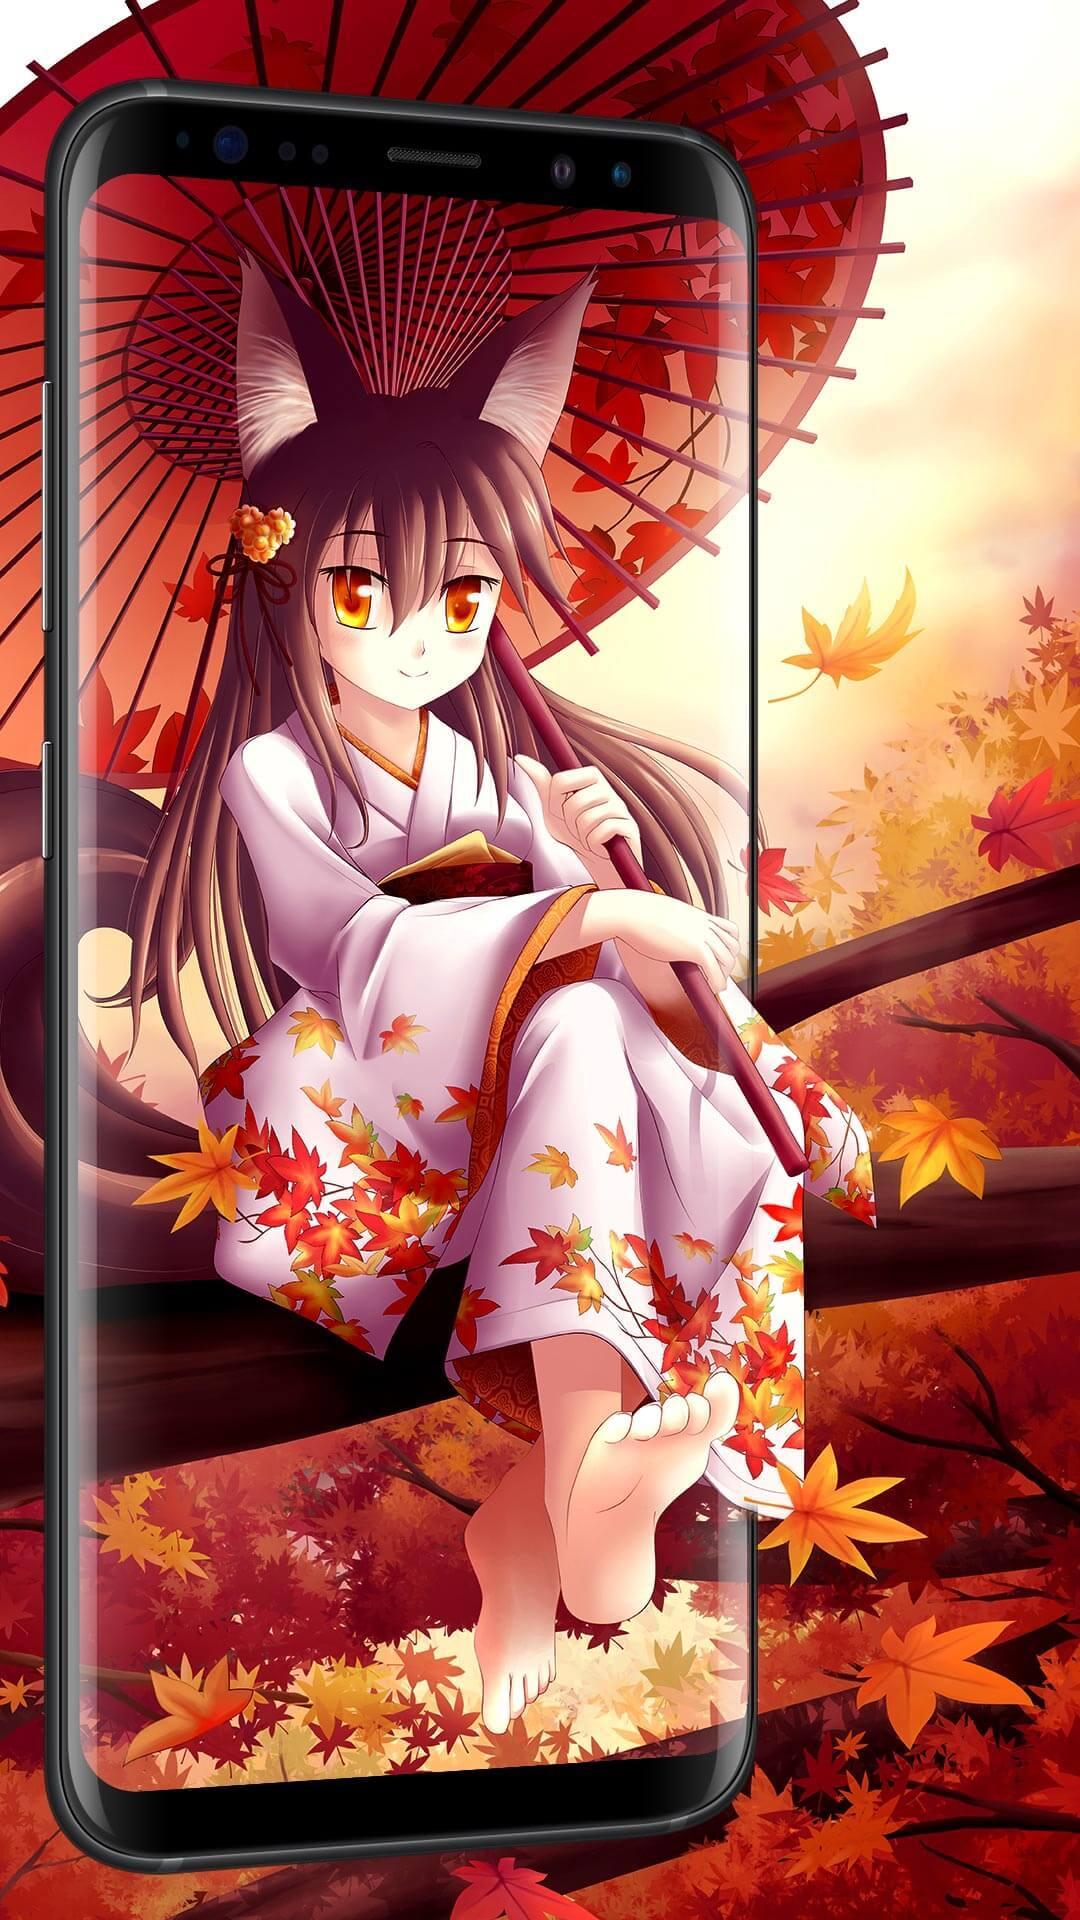 Anime Live Wallpaper 19 For Android Apk Download